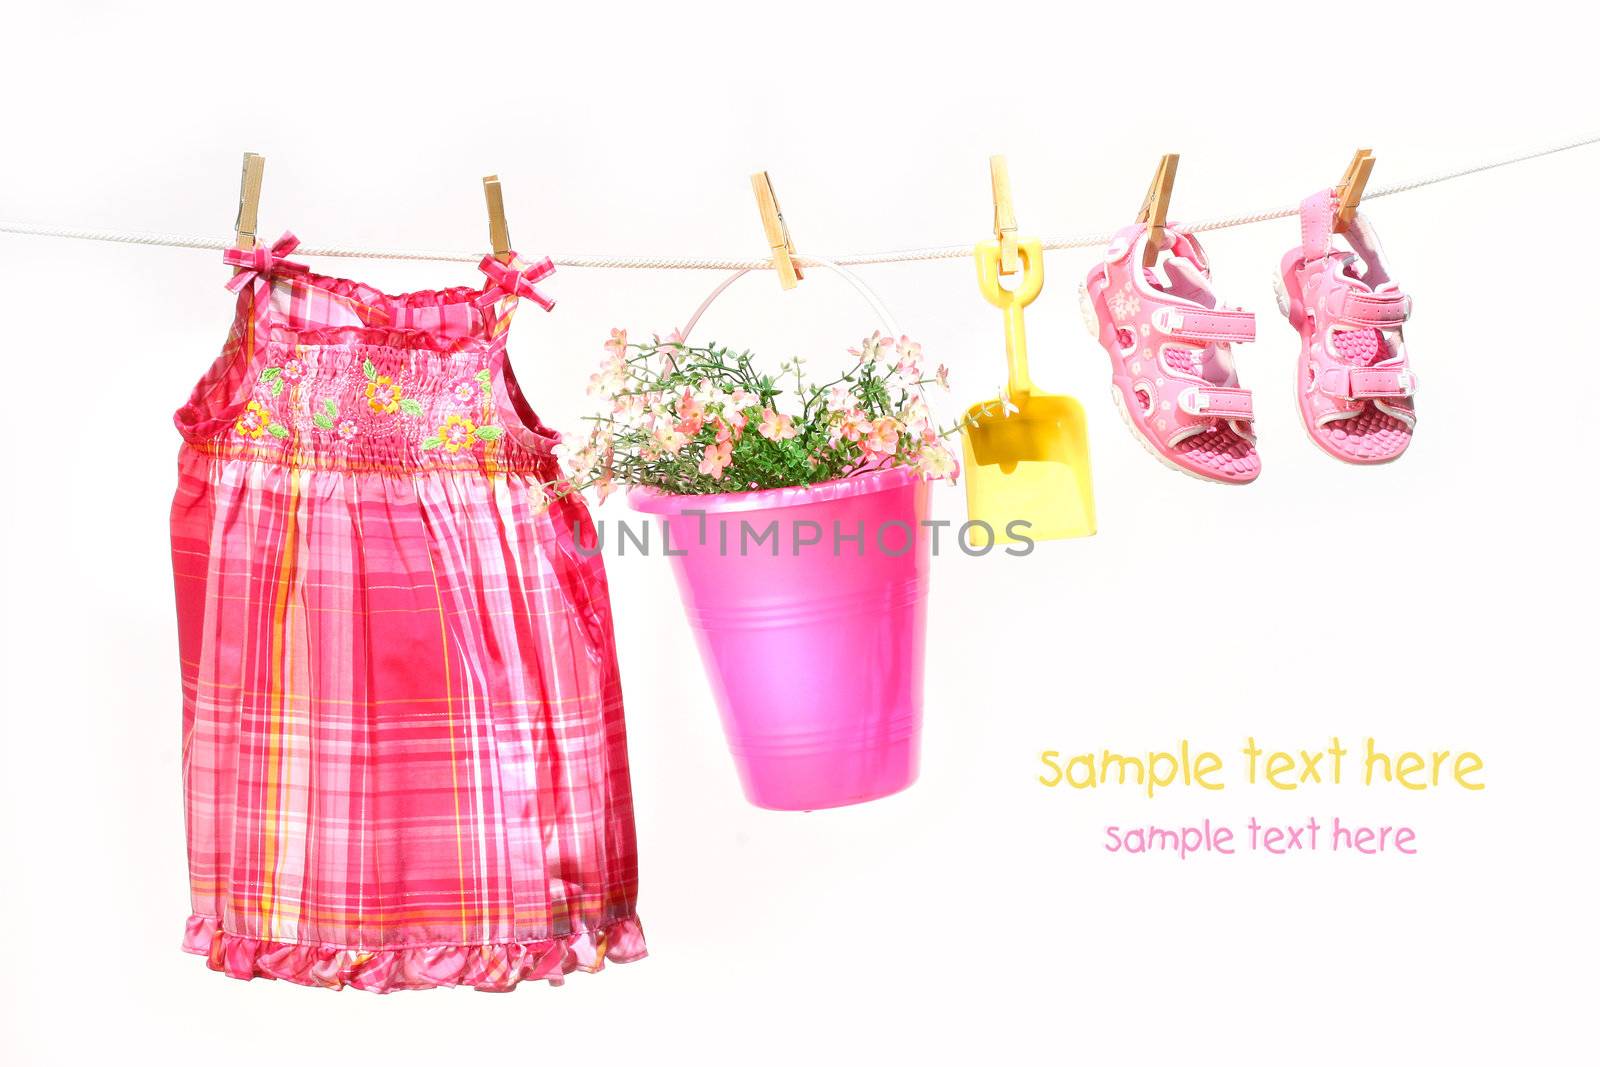 Little girl clothes and toys on a clothesline by Sandralise